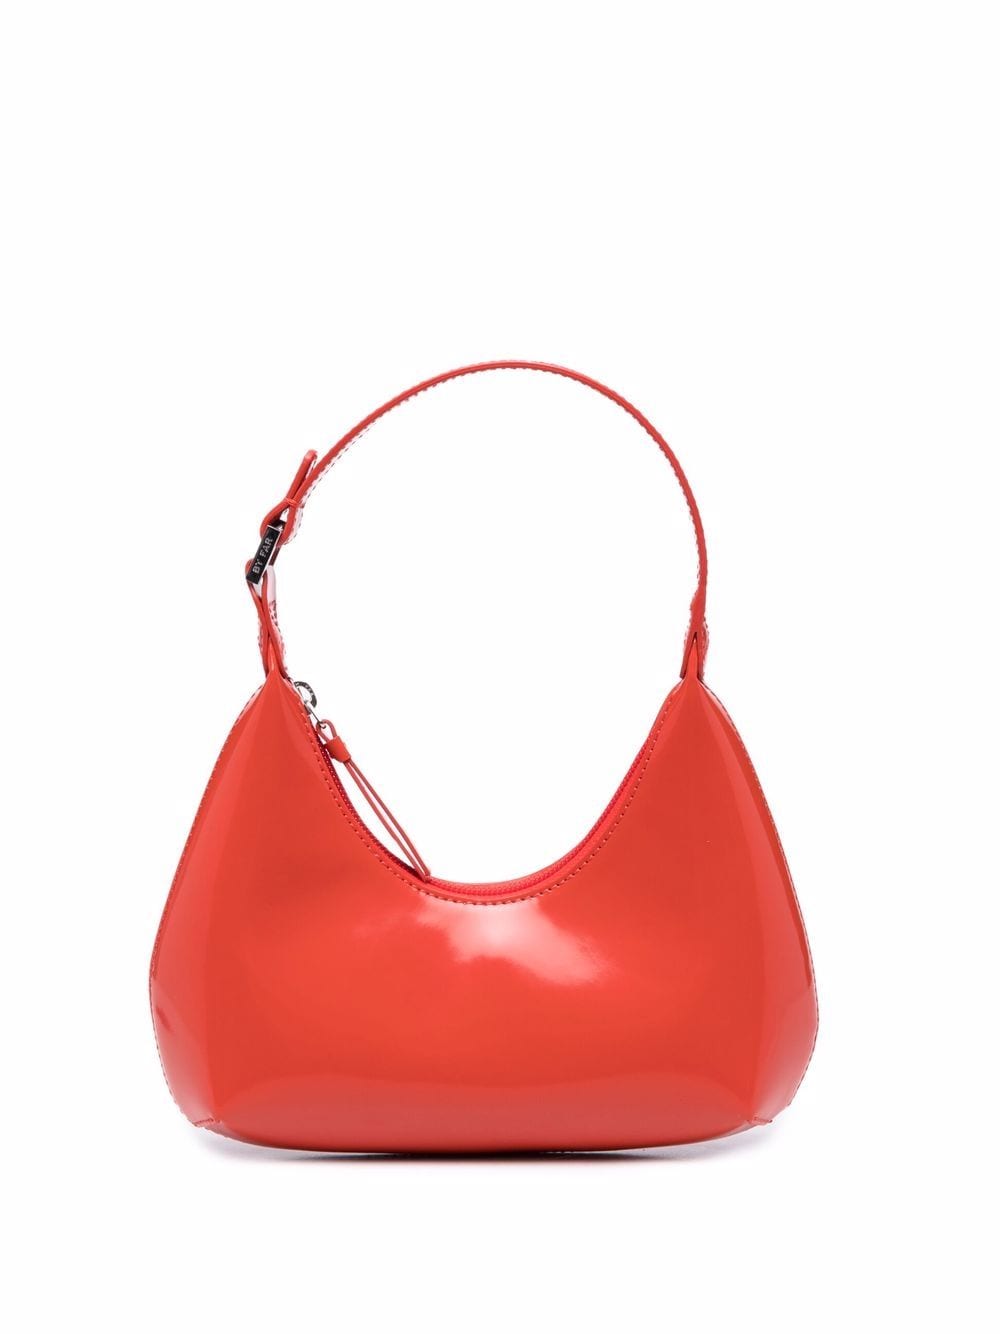 BY FAR MINI AMBER PATENT-LEATHER BAG